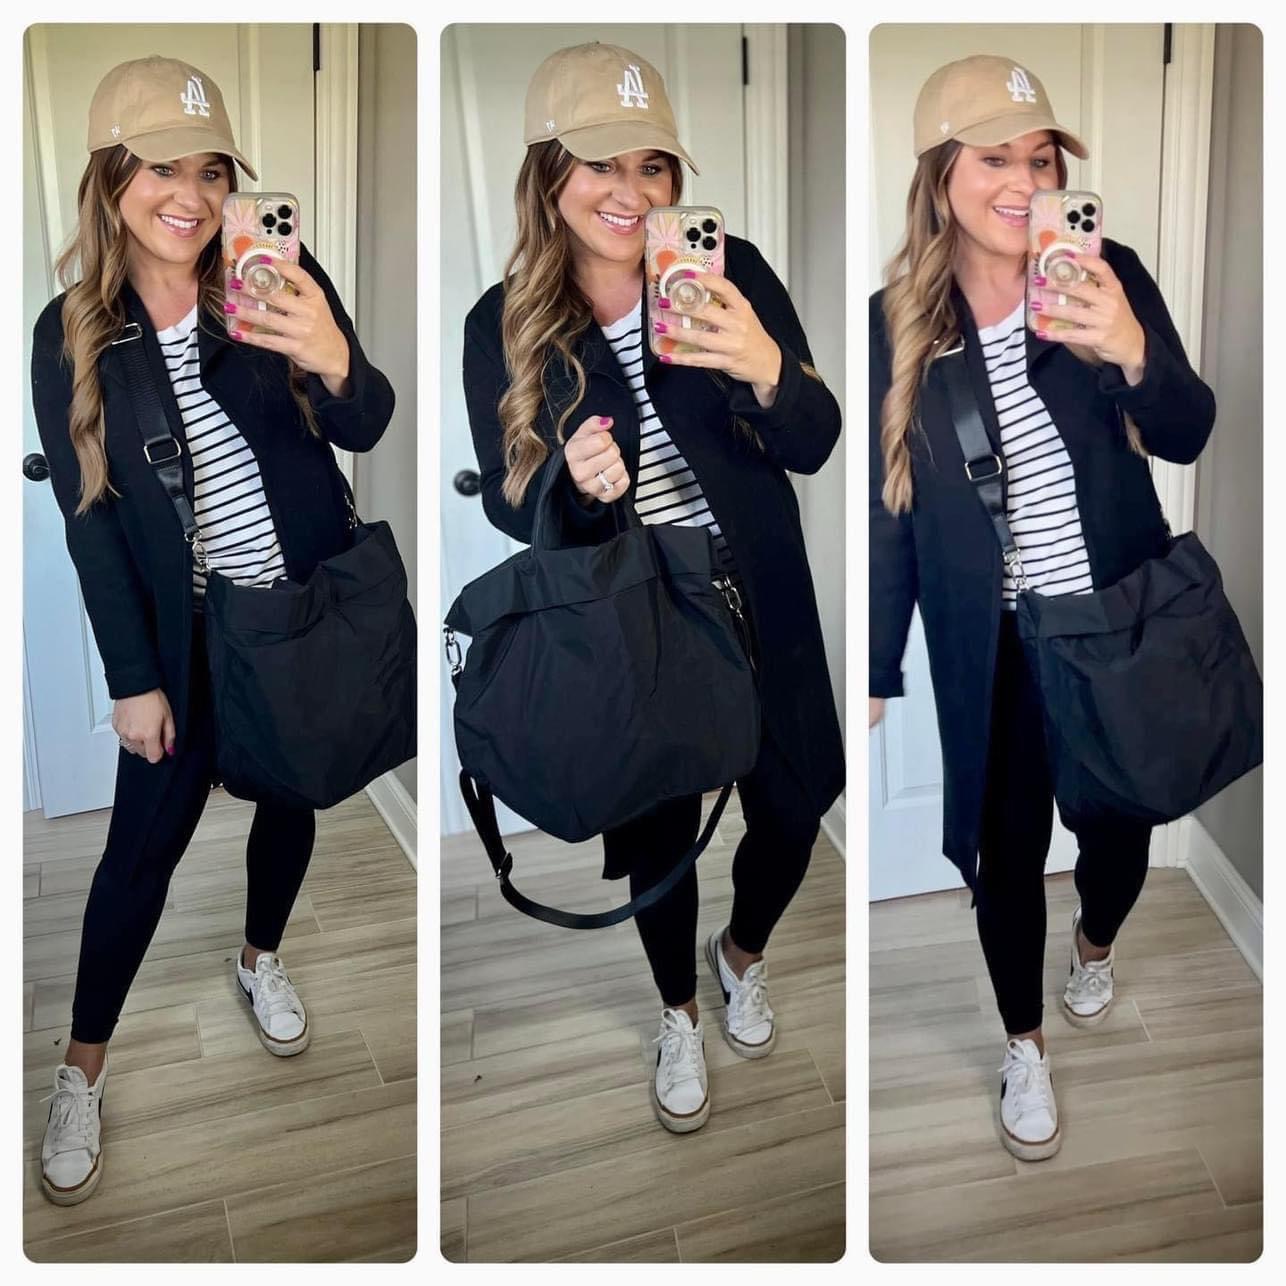 Stylish and Comfortable: Travel Outfit Ideas & Must Haves for Your Next Adventure

travel, travel outfit, vacation, vacation outfit, casual outfit, summer vacation, spring vacation, knit sweater, leggings, sneakers